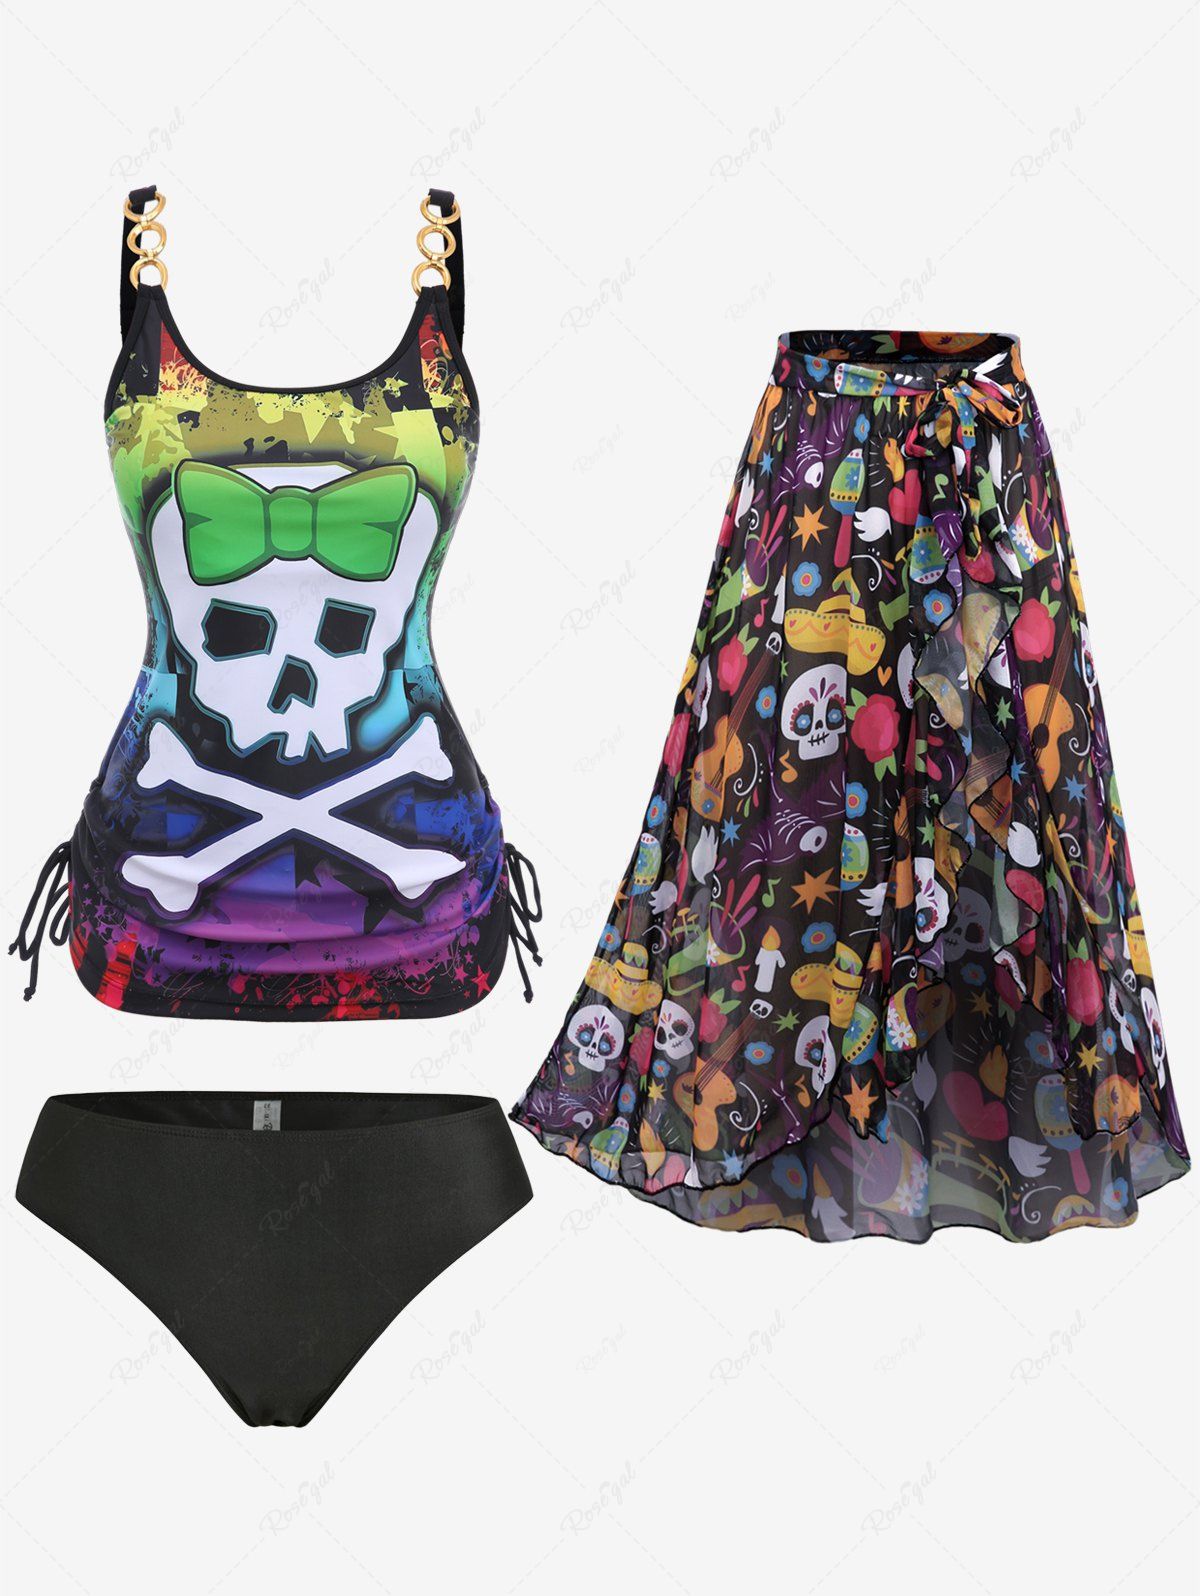 New Skull Bowknot Colorblock Painting Splatter Print Cinched Top and Bottom Tankini Set and Floral Mesh Wrap Flounce Asymmetric Sarong Three Piece Swimsuit  